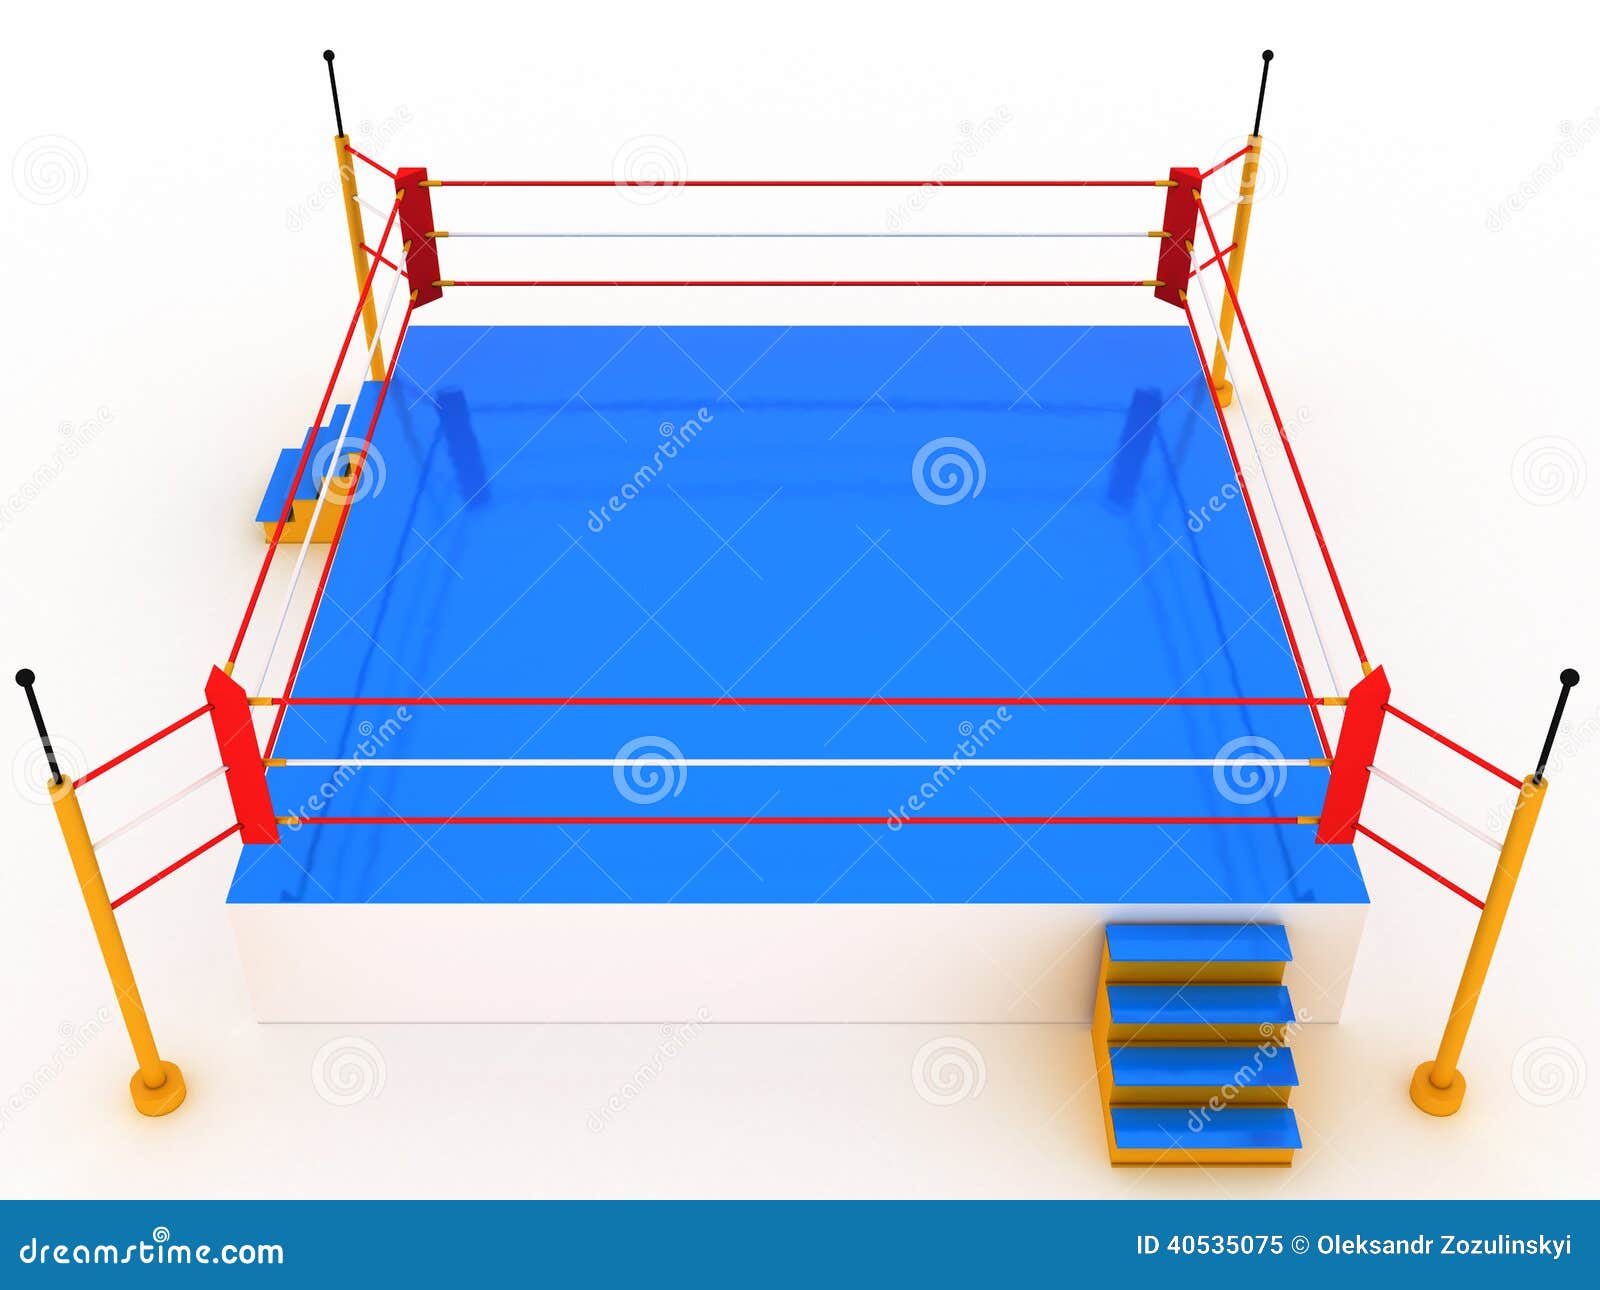 boxing ring clipart free - photo #33